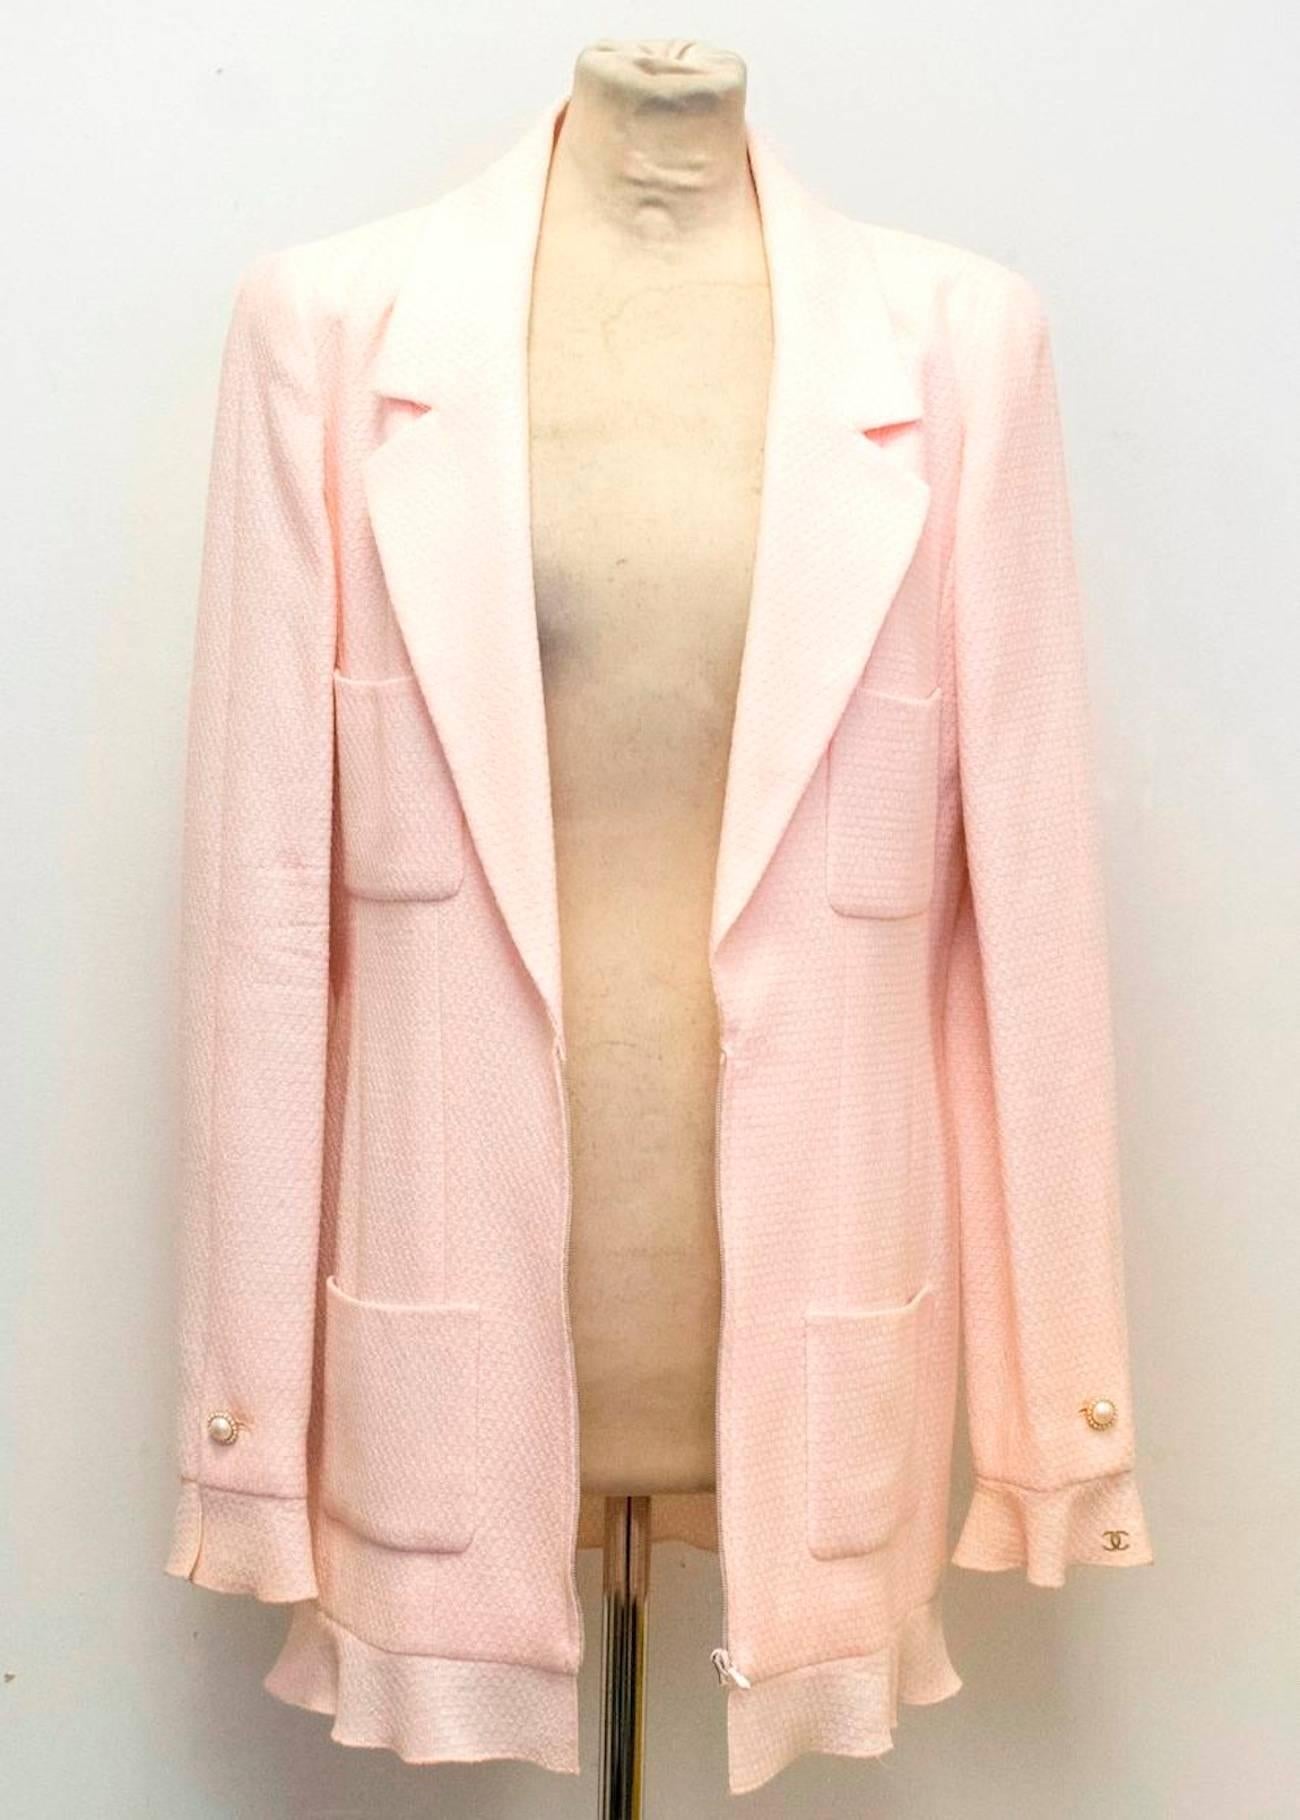 Women's Chanel Nude Pink Jacket/Short Coat with Ruffled Cuffs and Hem  For Sale